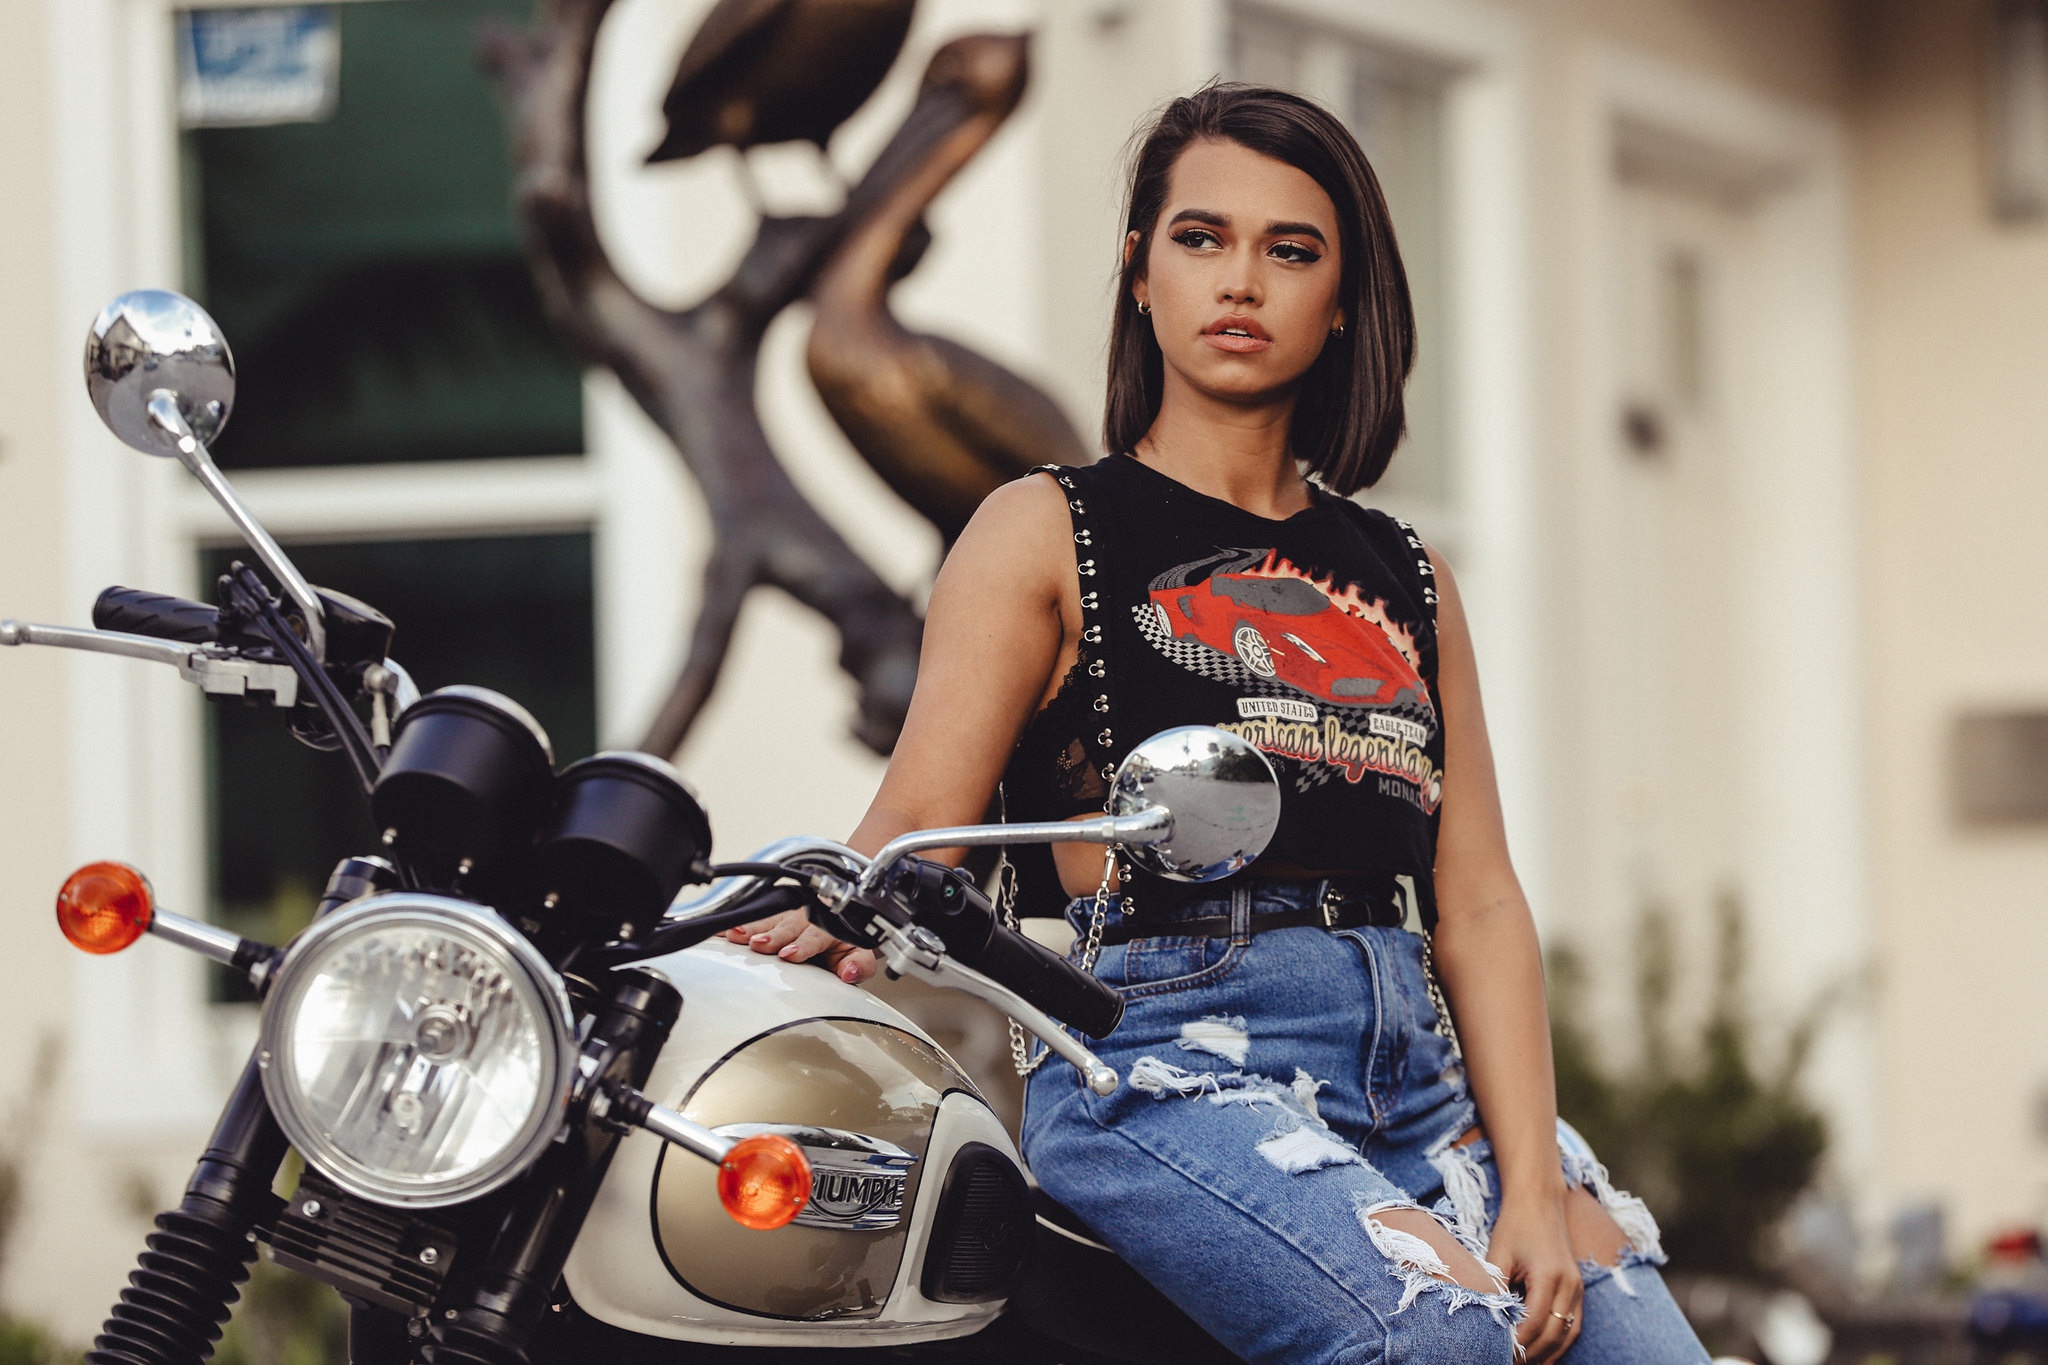 People 2048x1365 women model motorcycle women with motorcycles women outdoors outdoors dark hair urban torn jeans torn clothes brunette